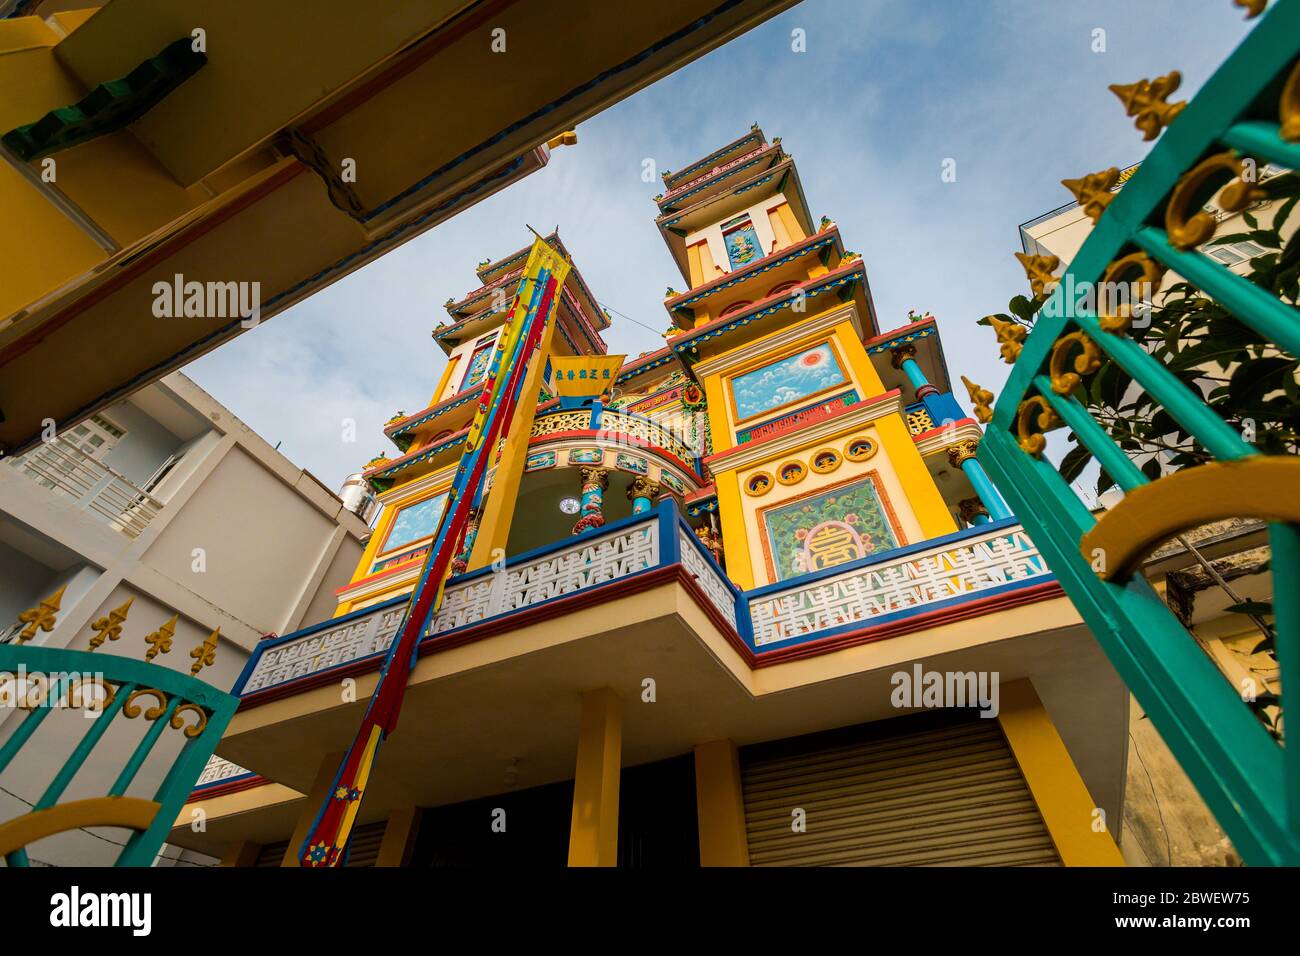 Caodaist temple in Duong Dong village, Phu Quoc island in Vietnam. Colorful details. Stock Photo